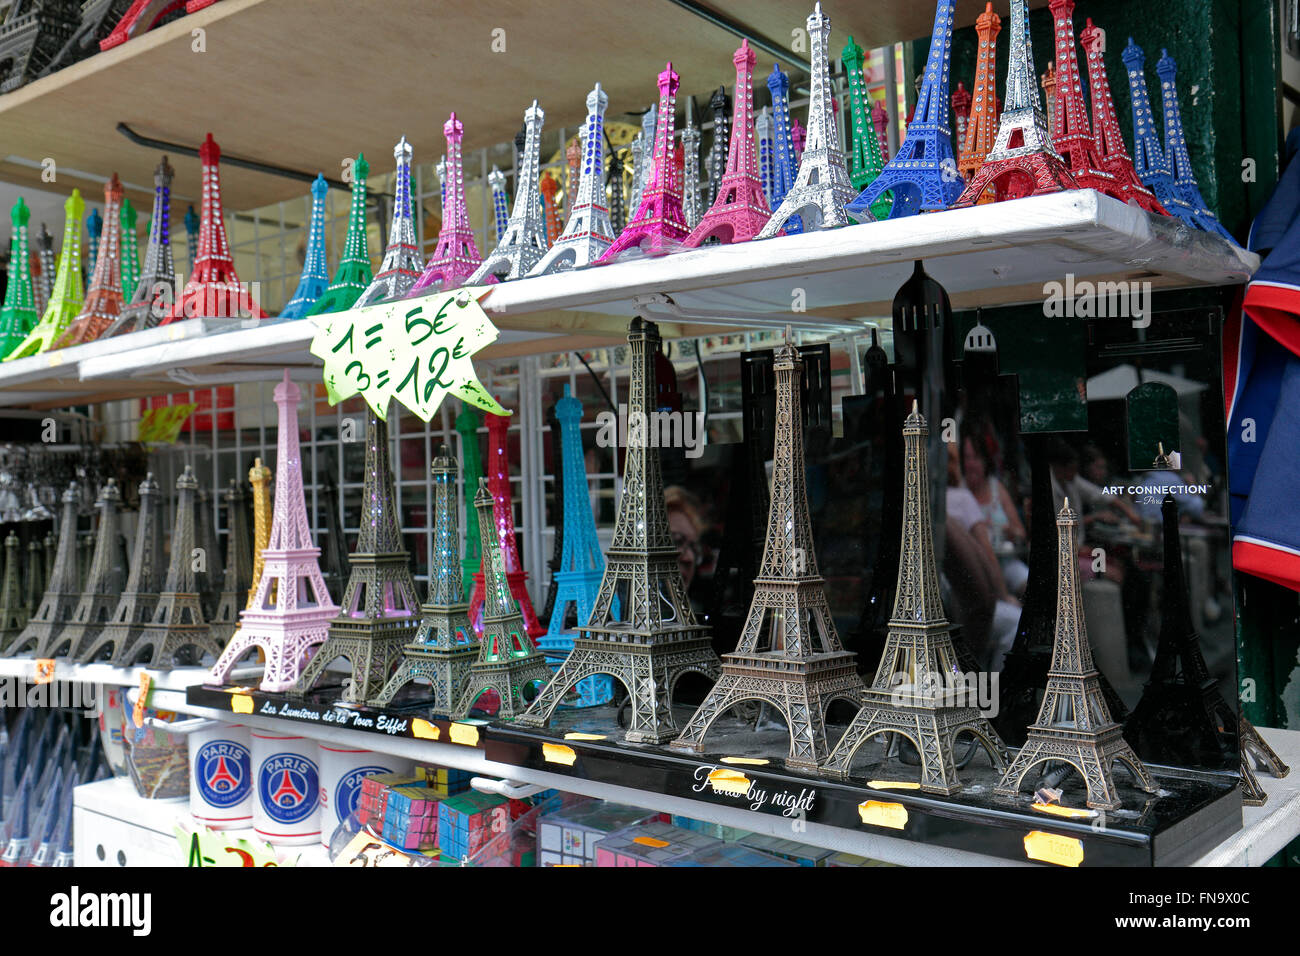 Shelves of miniature Eiffel Tower tourist souvenir gifts in different colours in a shop in Paris, France. Stock Photo